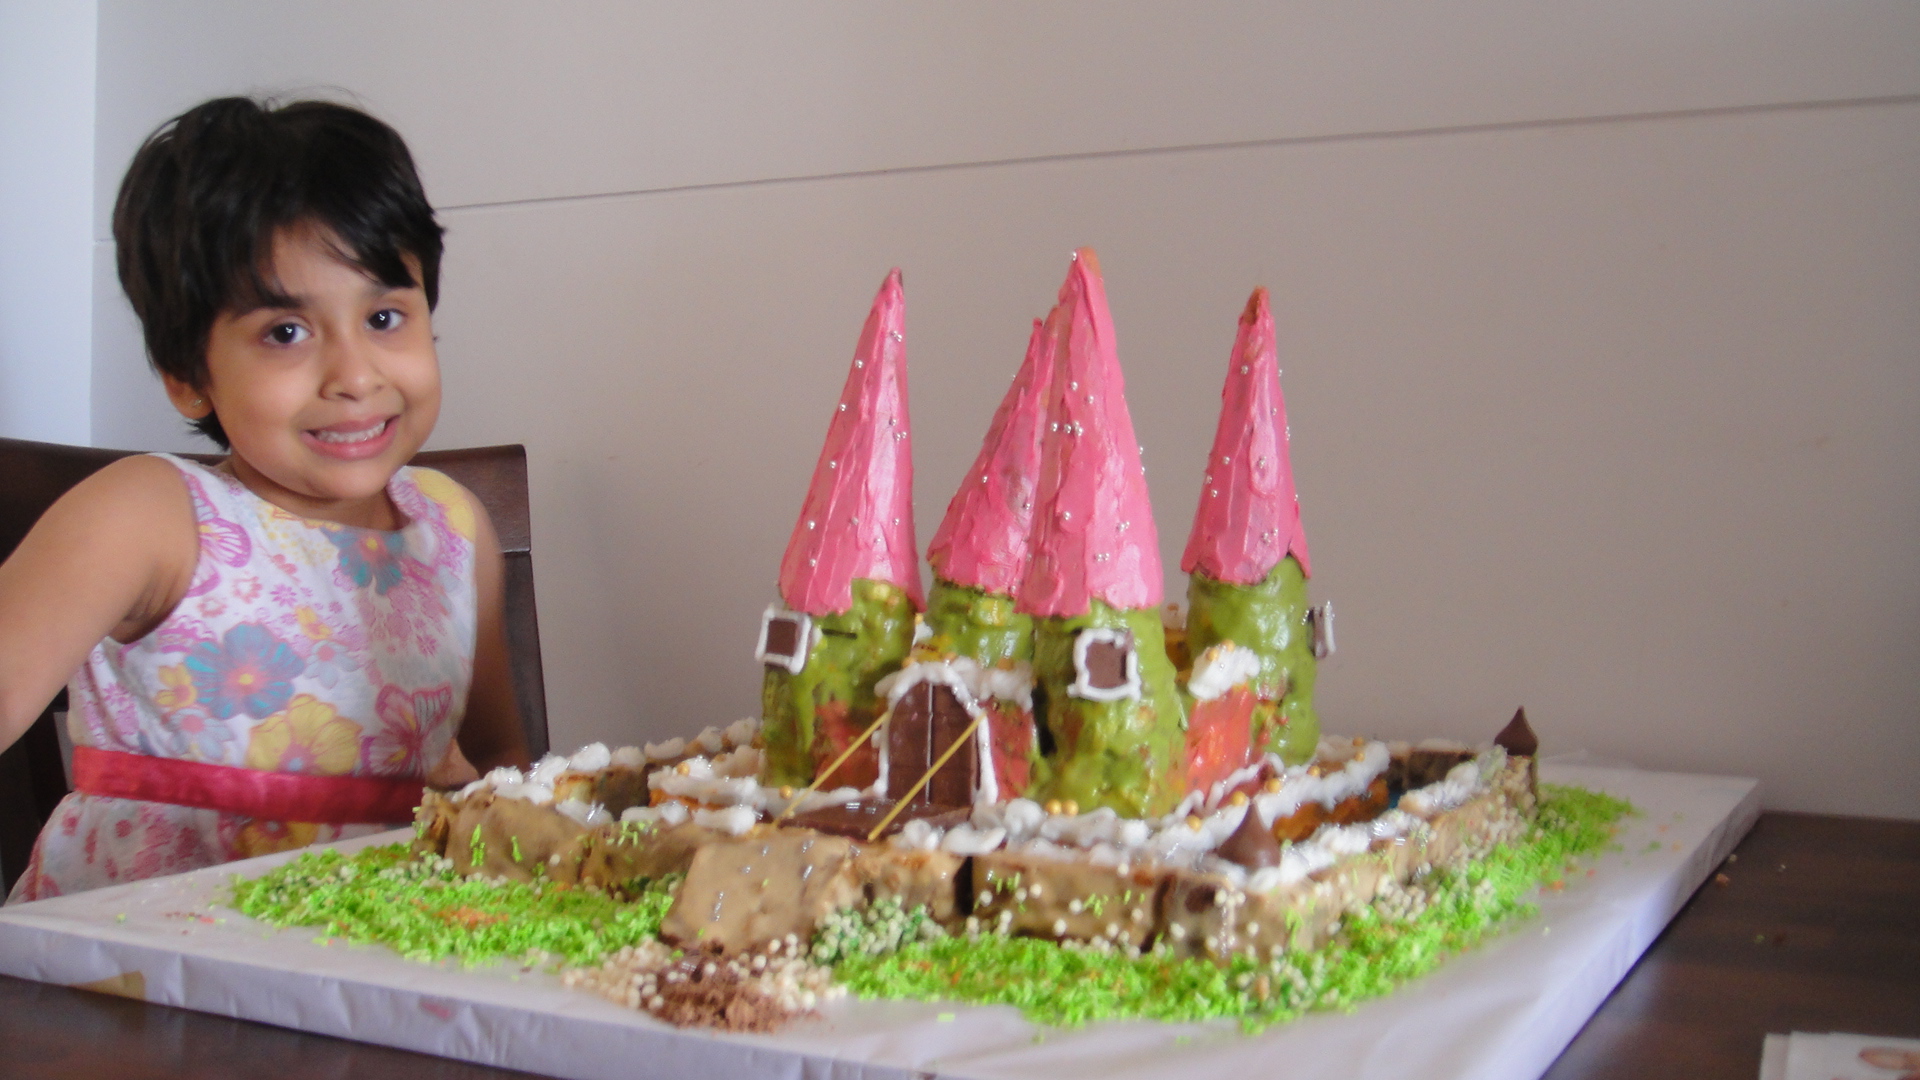 Cool Castle Cake for my Daughter's 6th Birthday